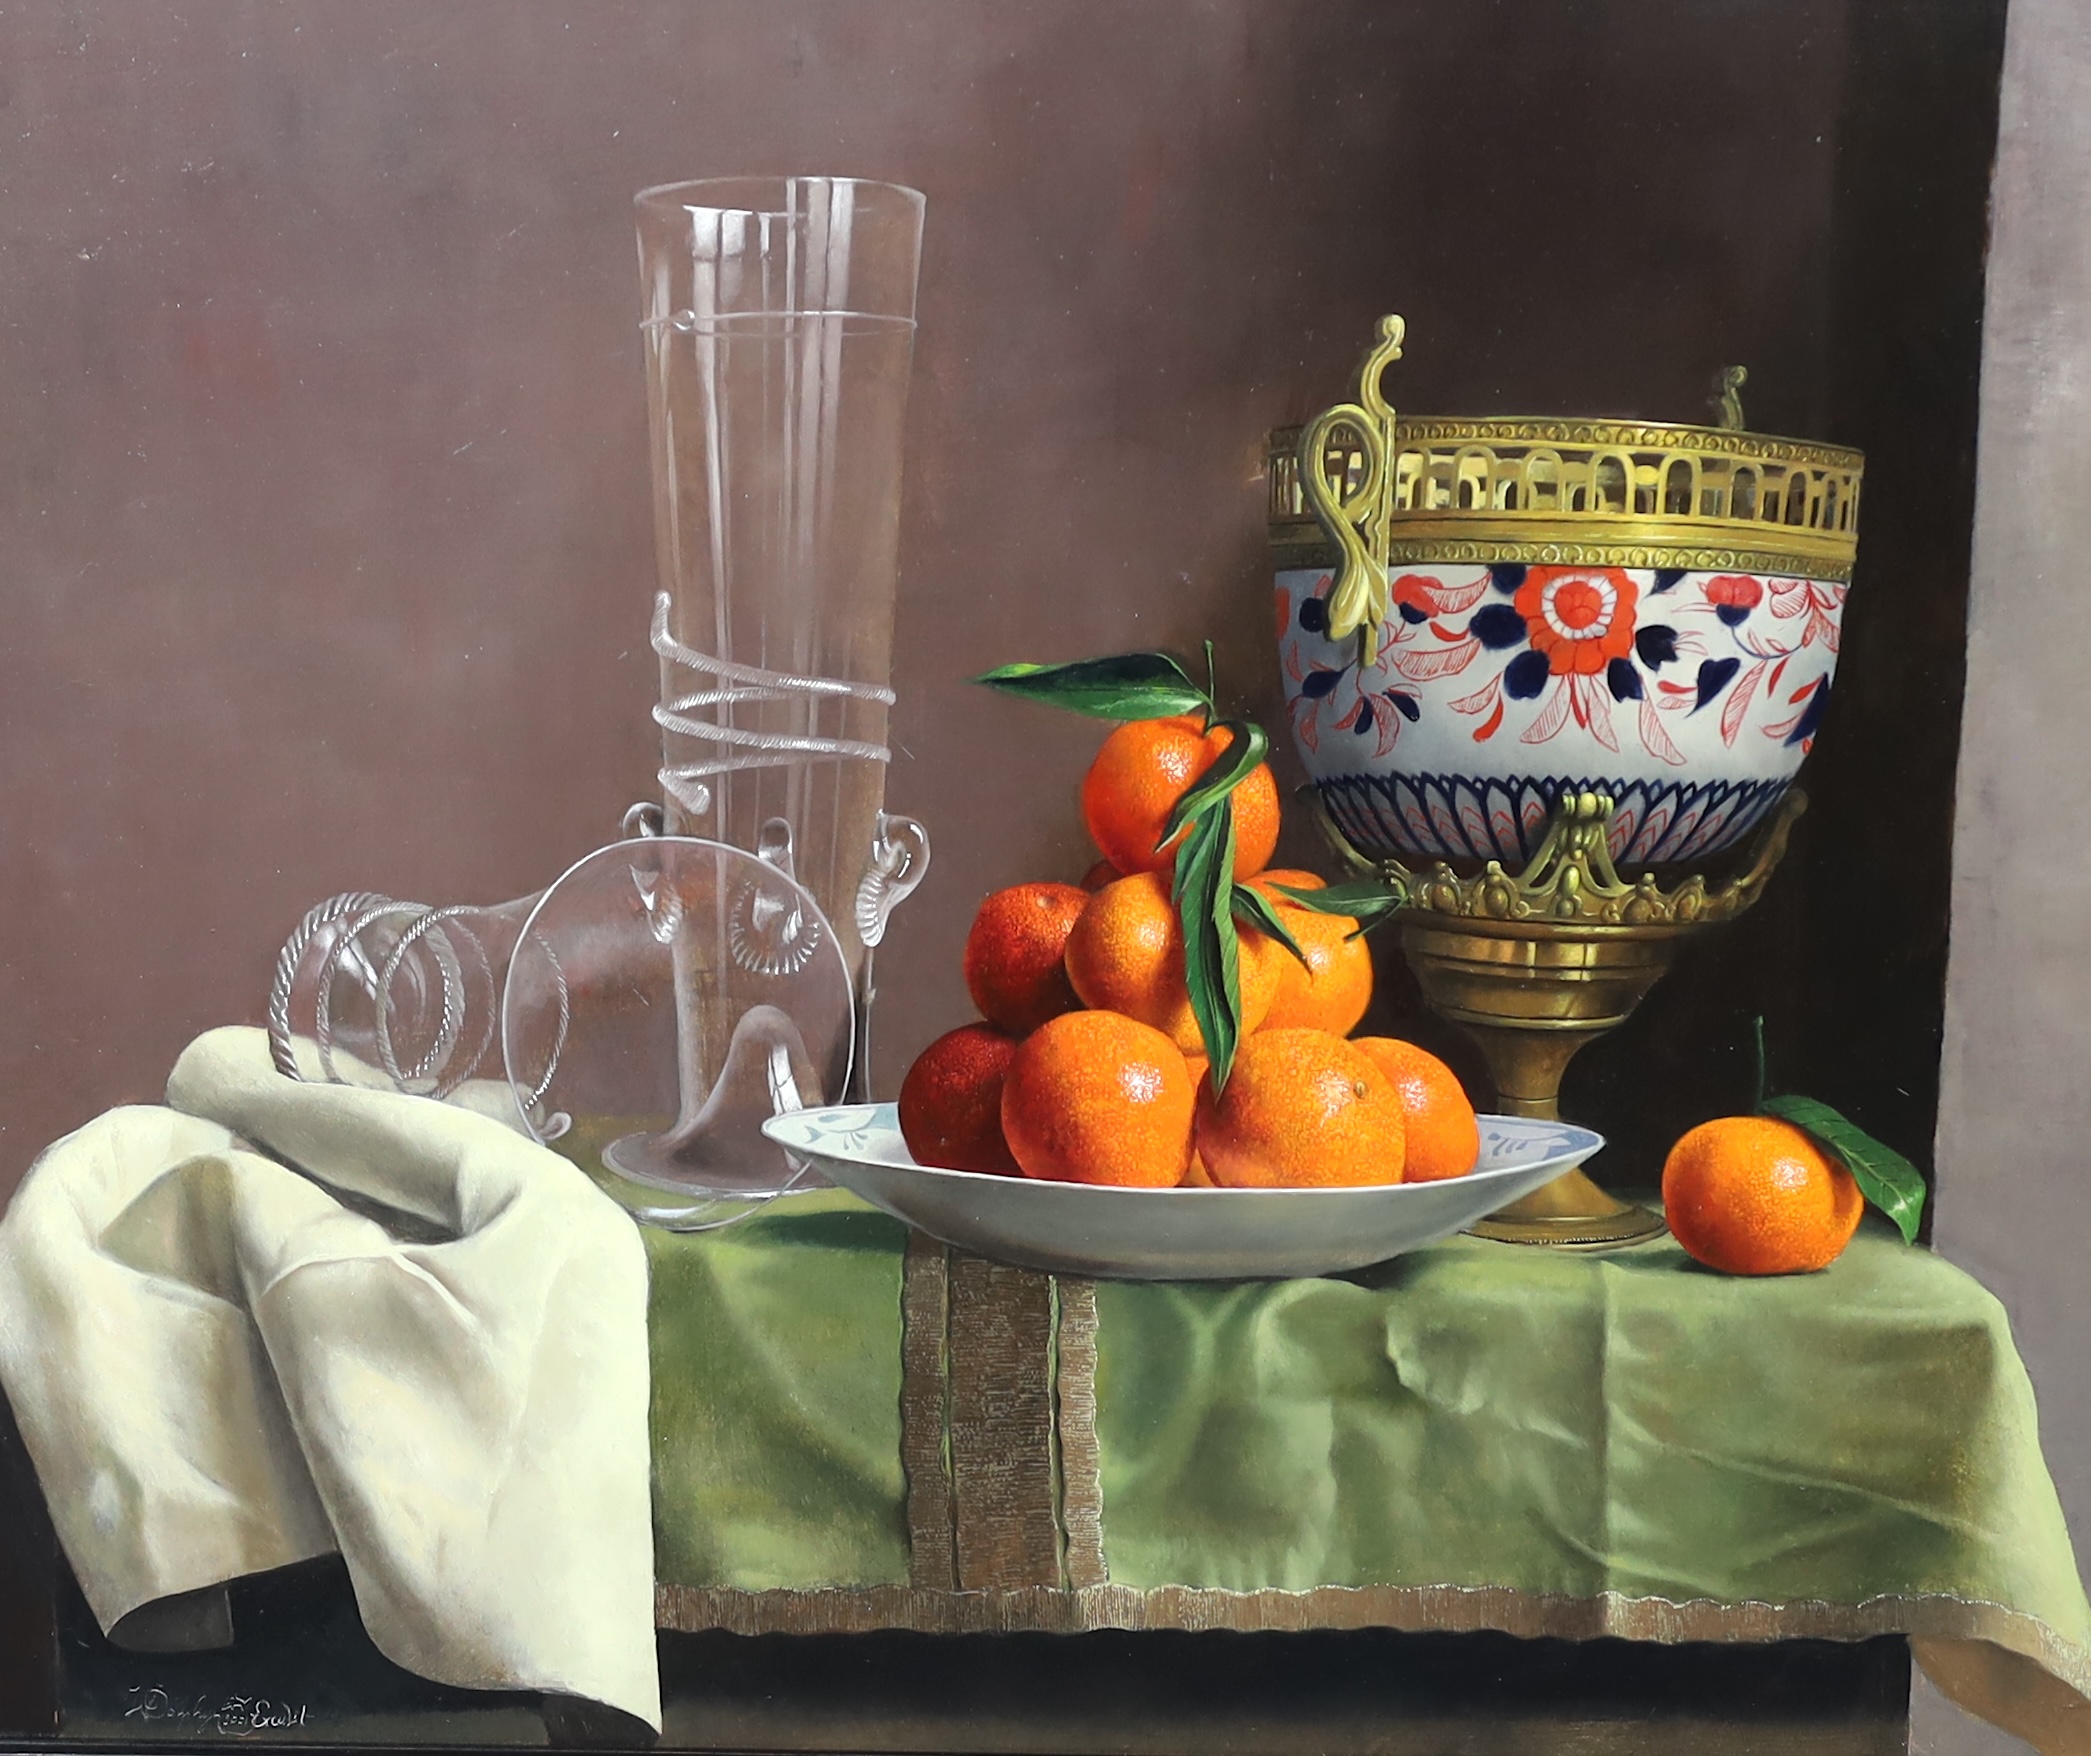 Willem Dolphyn (Belgian, 1935-2016), Still life of oranges, glassware and an ormolu mounted vase upon a draped table, oil on panel, 49 x 58cm